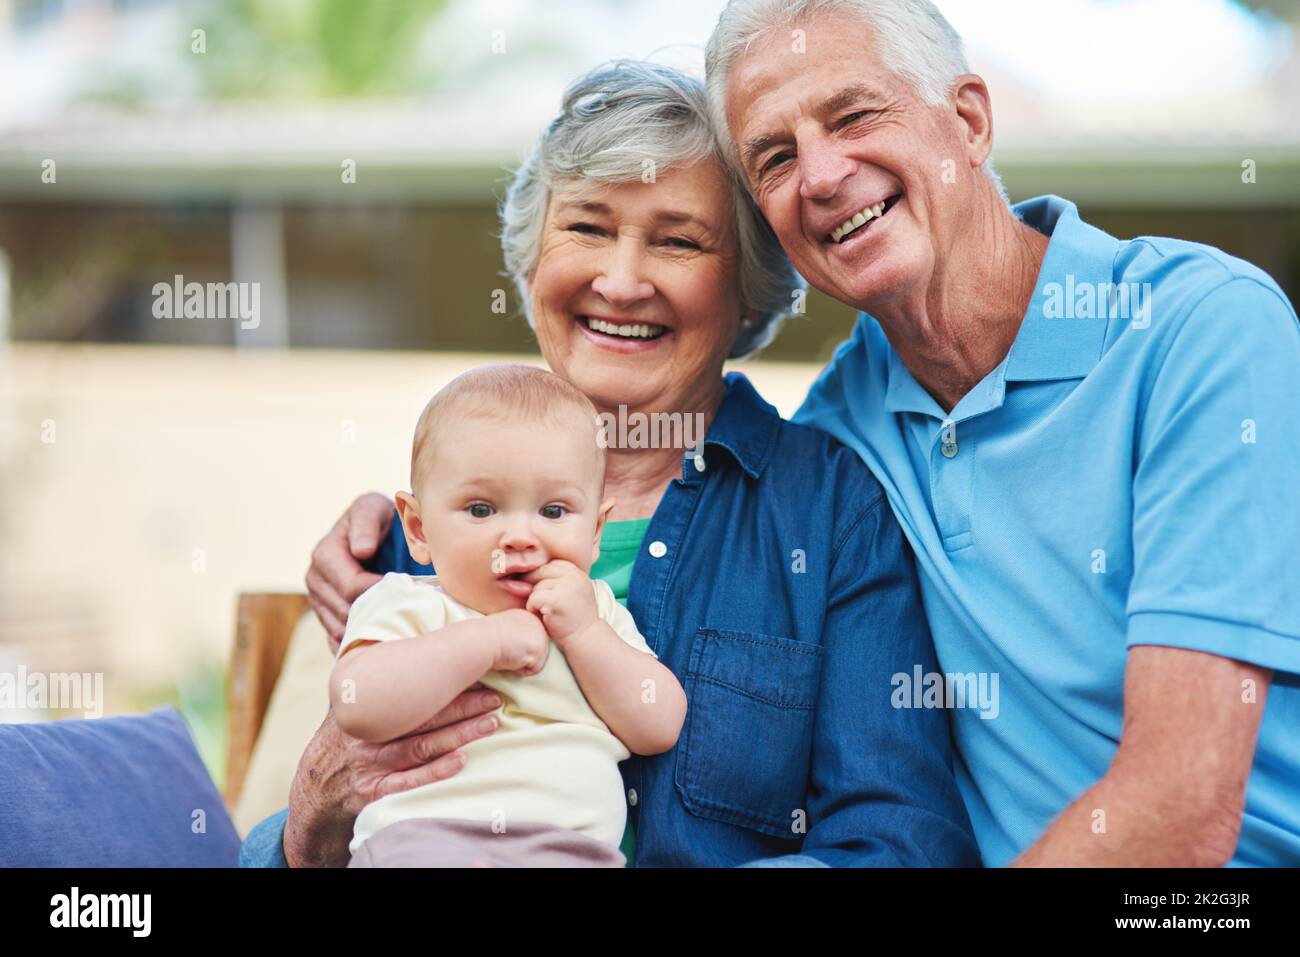 Grandsons make life special. Cropped shot of a senior couple spending time with their grandson. Stock Photo